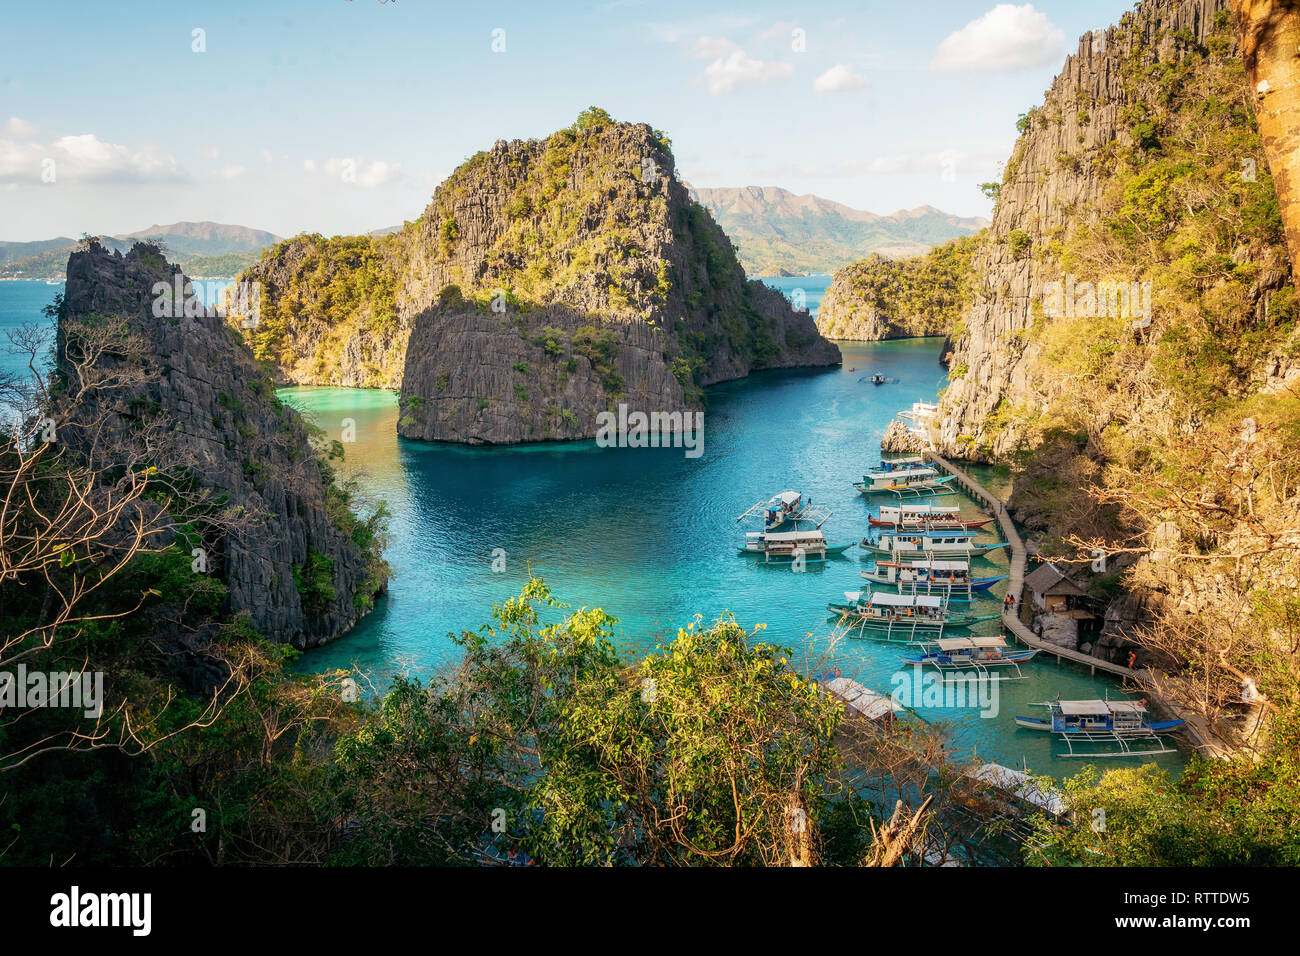 Landscape of tropical island. Areial view of bay, Coron island, Philippines. Stock Photo